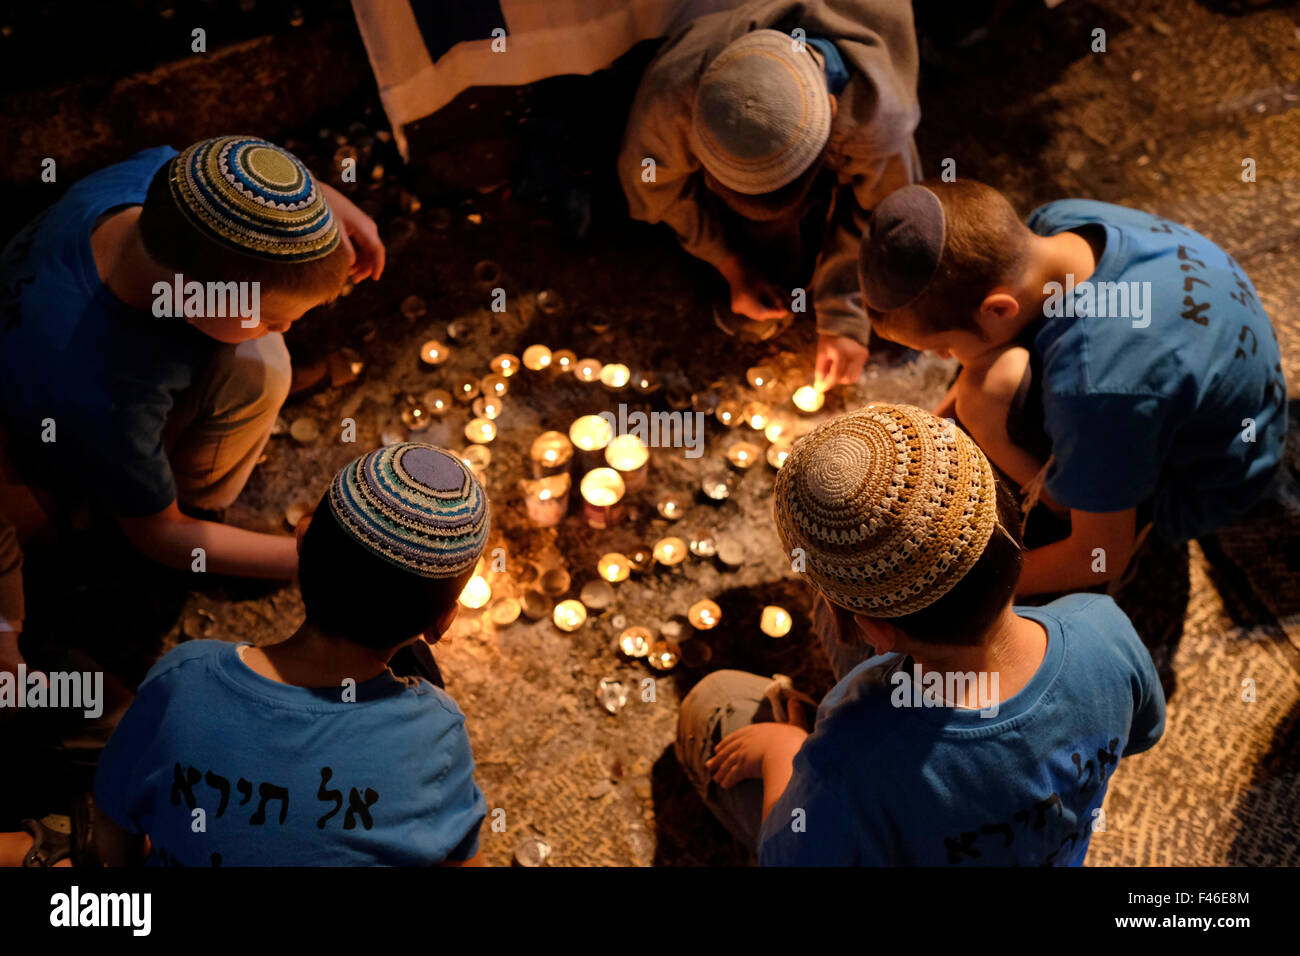 ISRAEL - JERUSALEM 09 OCTOBER 2015: Religious Jewish children light memorial candles as their parents pray in Hagai street in the Muslim Quarter Old city of Jerusalem, Israel on October 8, 2015. Hagai street a main commercial street in the old city has been the site of recent attacks from Palestinians. Stock Photo